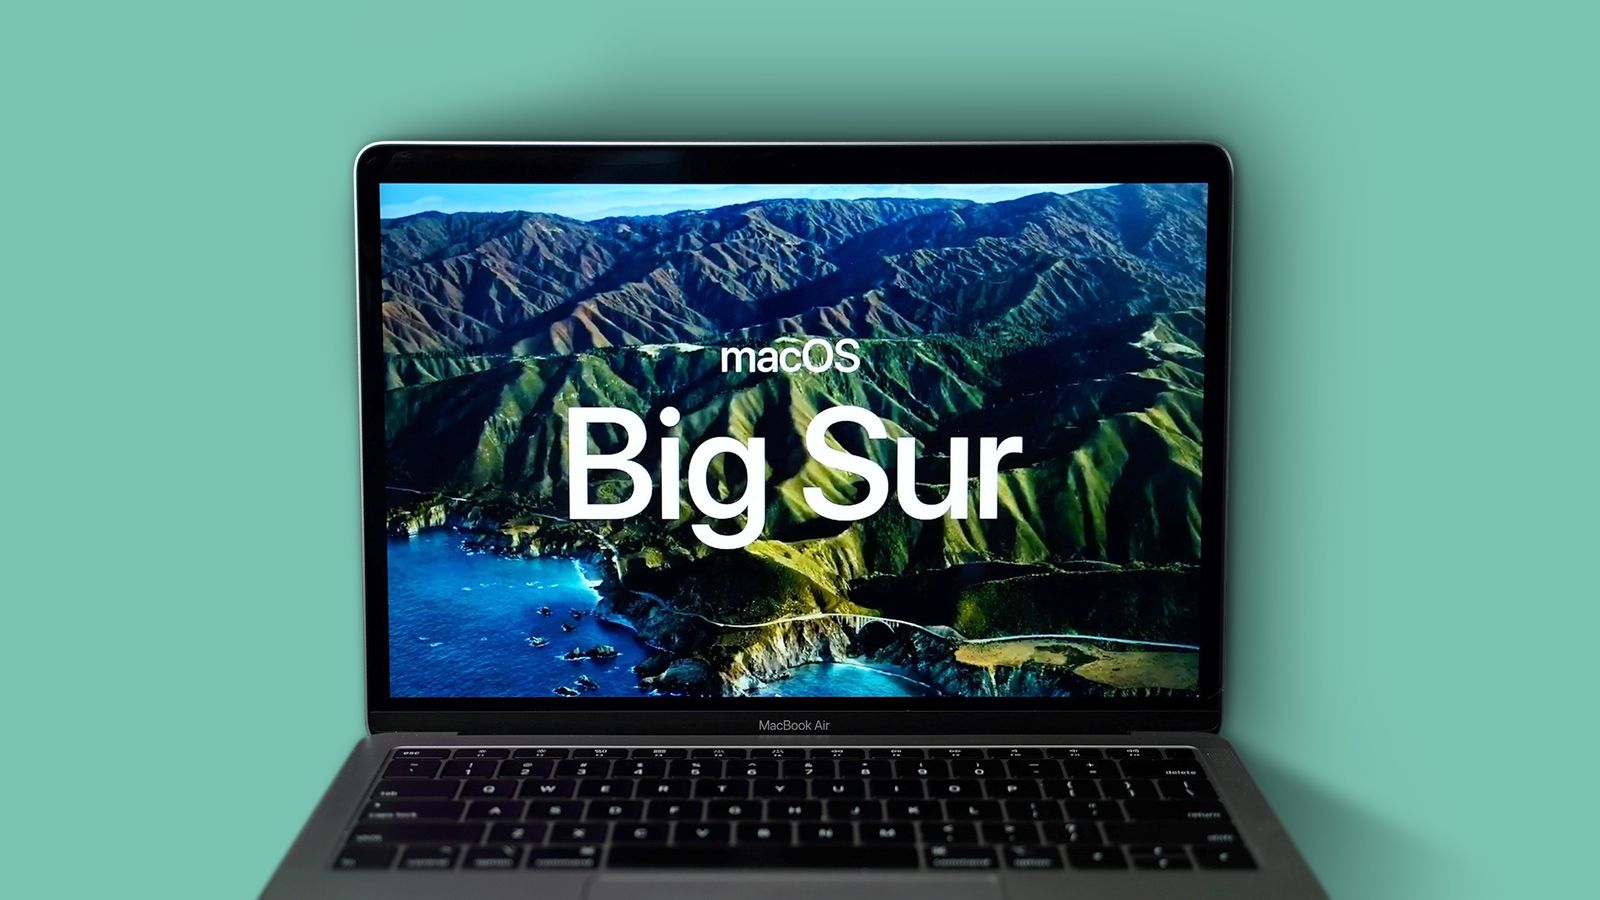 Download MacOS Big Sur now; here's how - CNET